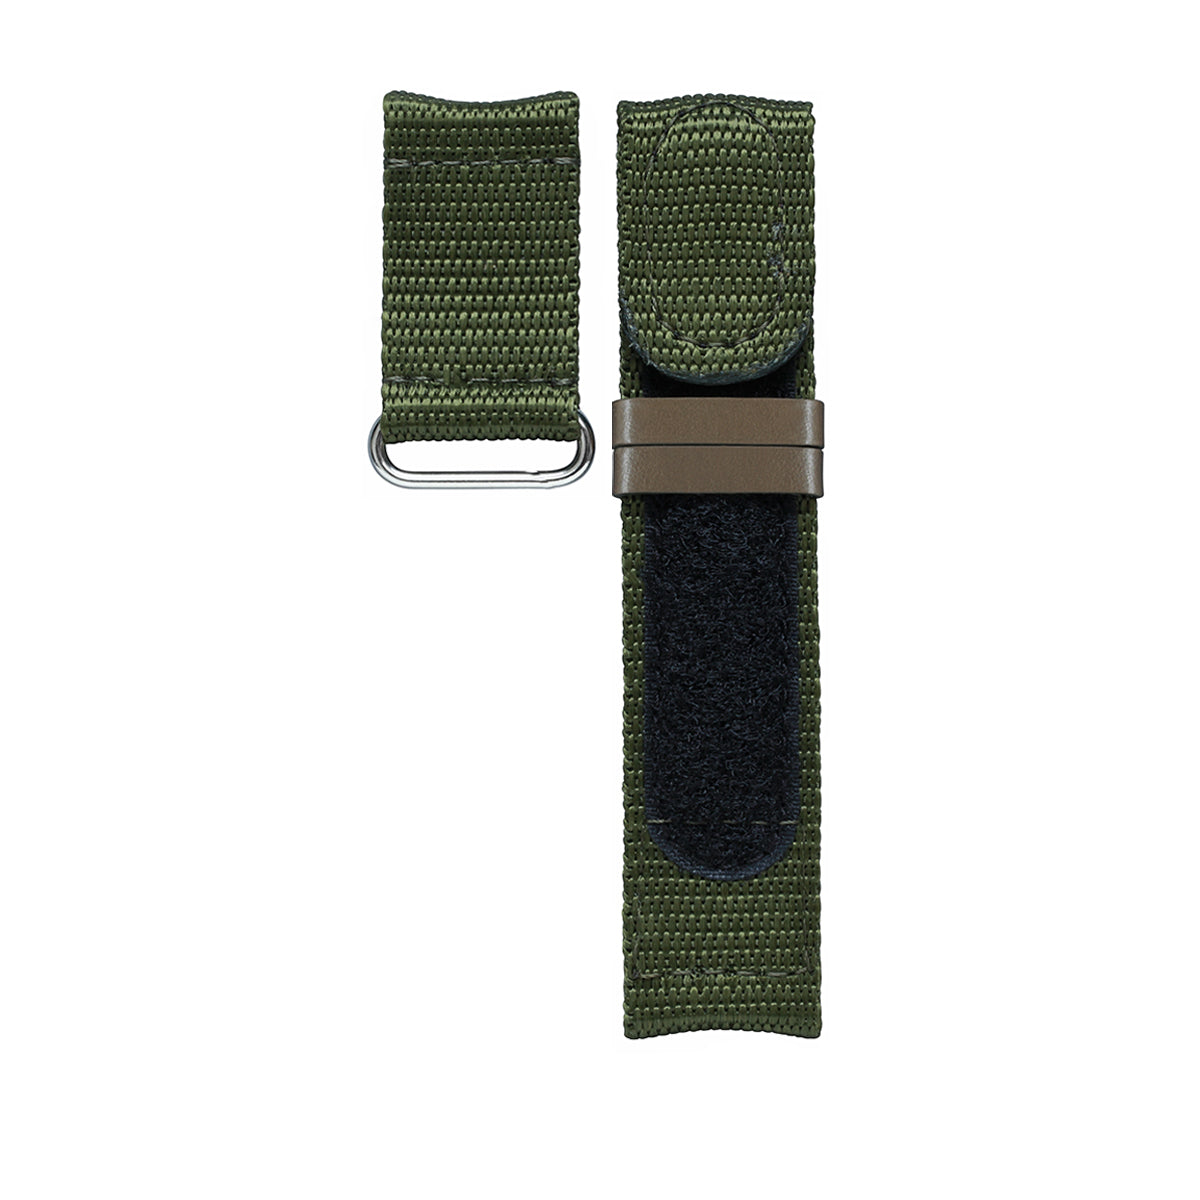 Fabric Strap for TYPE 5